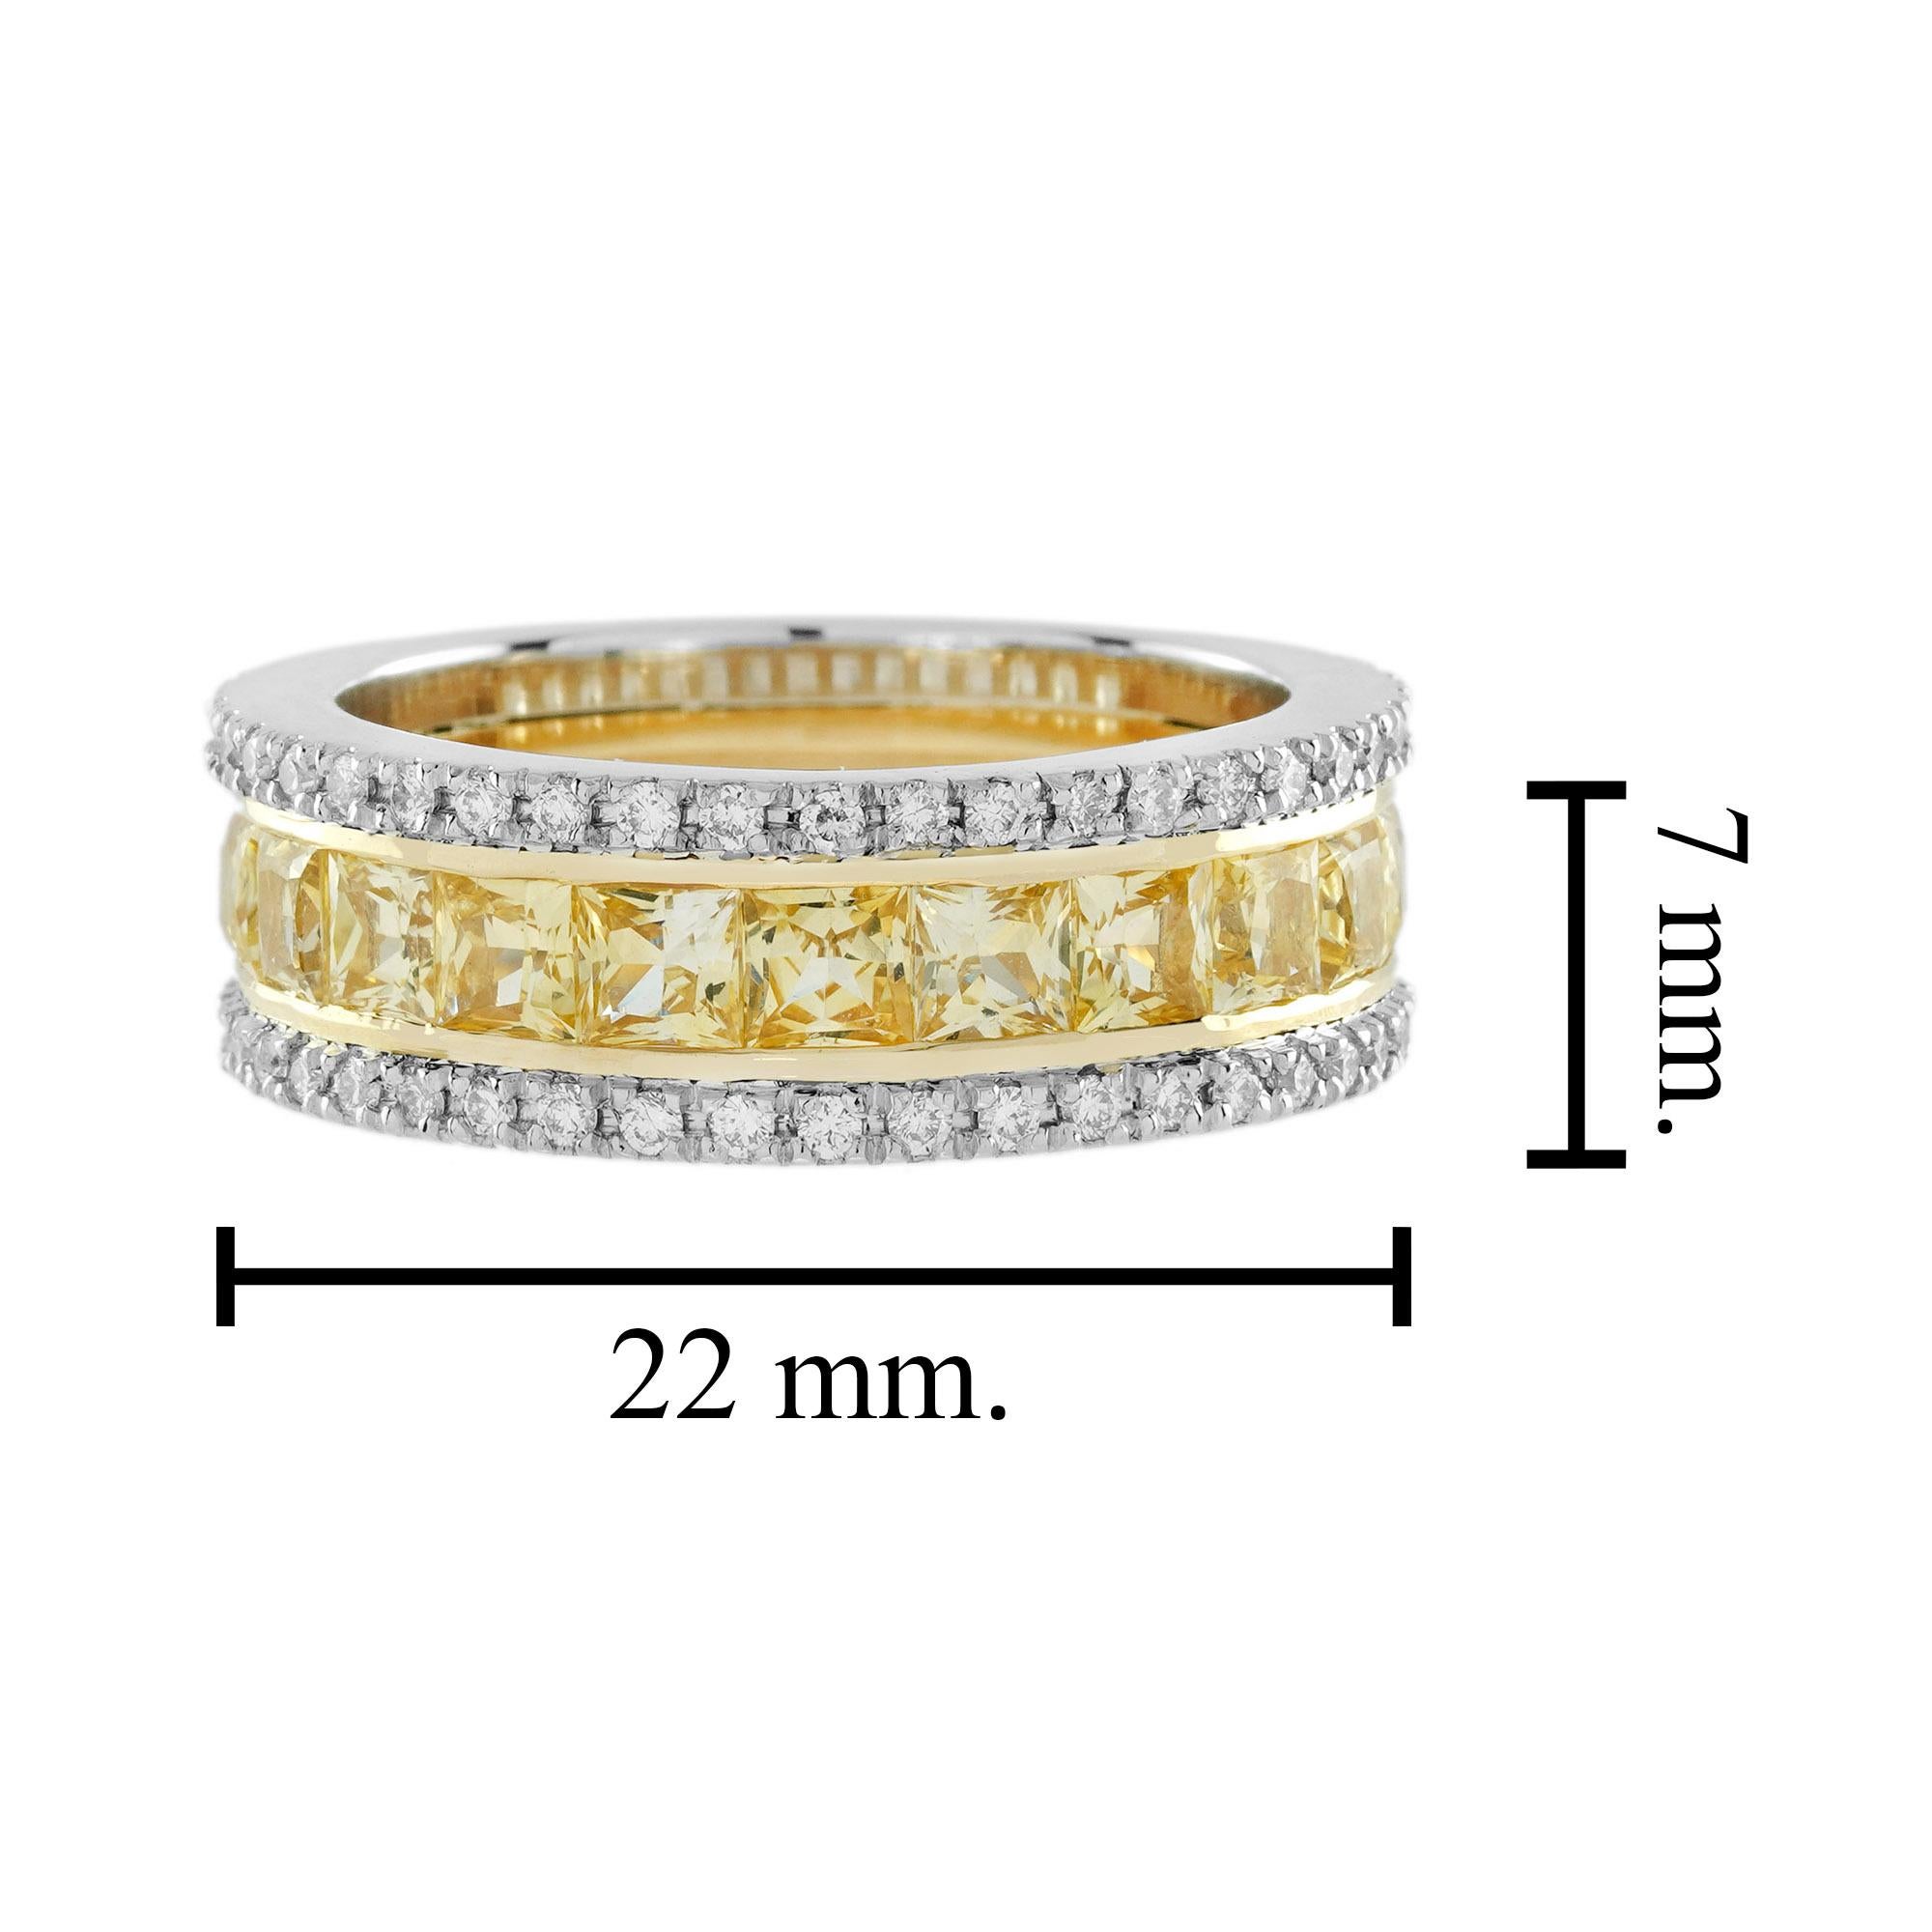 3 Ct. Yellow Sapphire and Diamond Classic Half Eternity Band Ring in 18K Gold For Sale 1